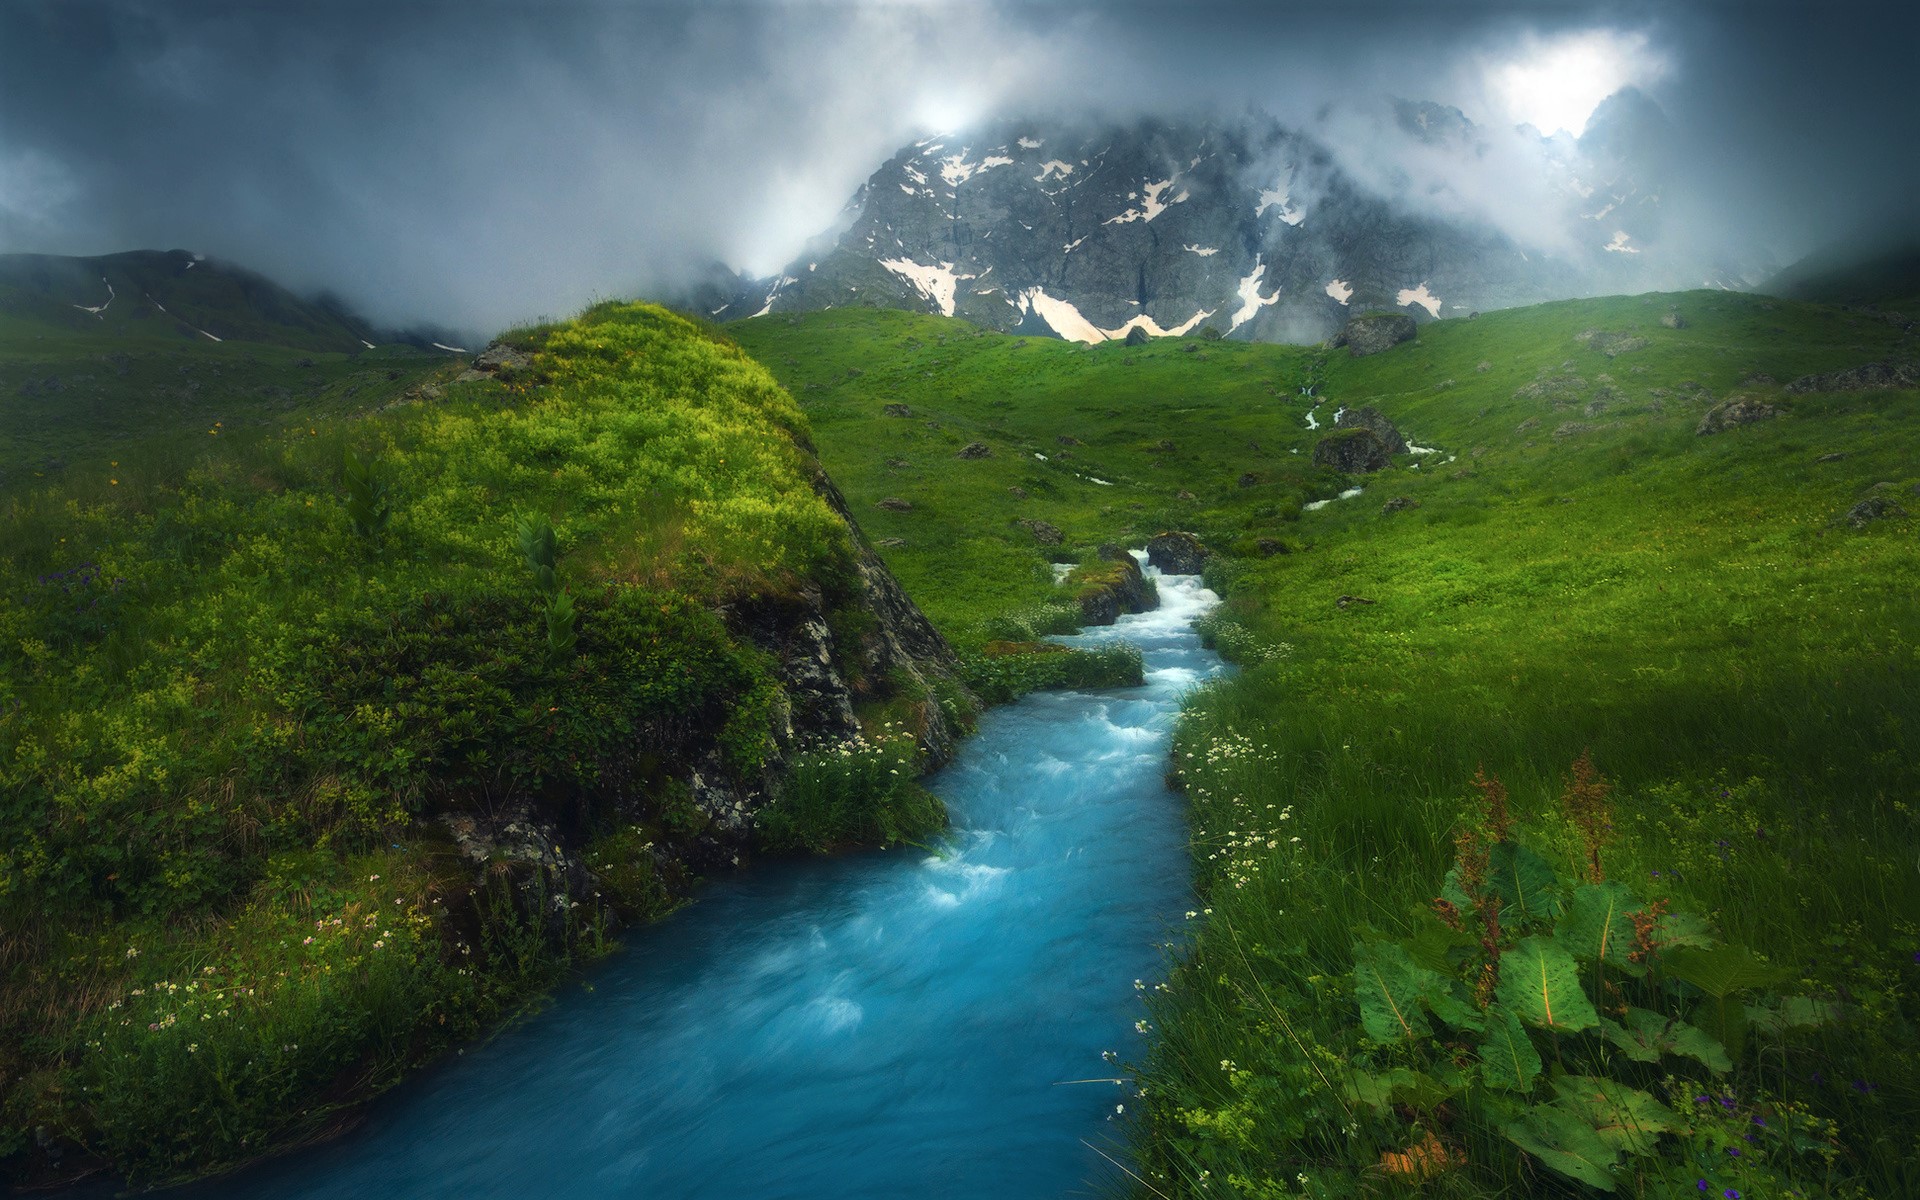 River on Misty Mountain